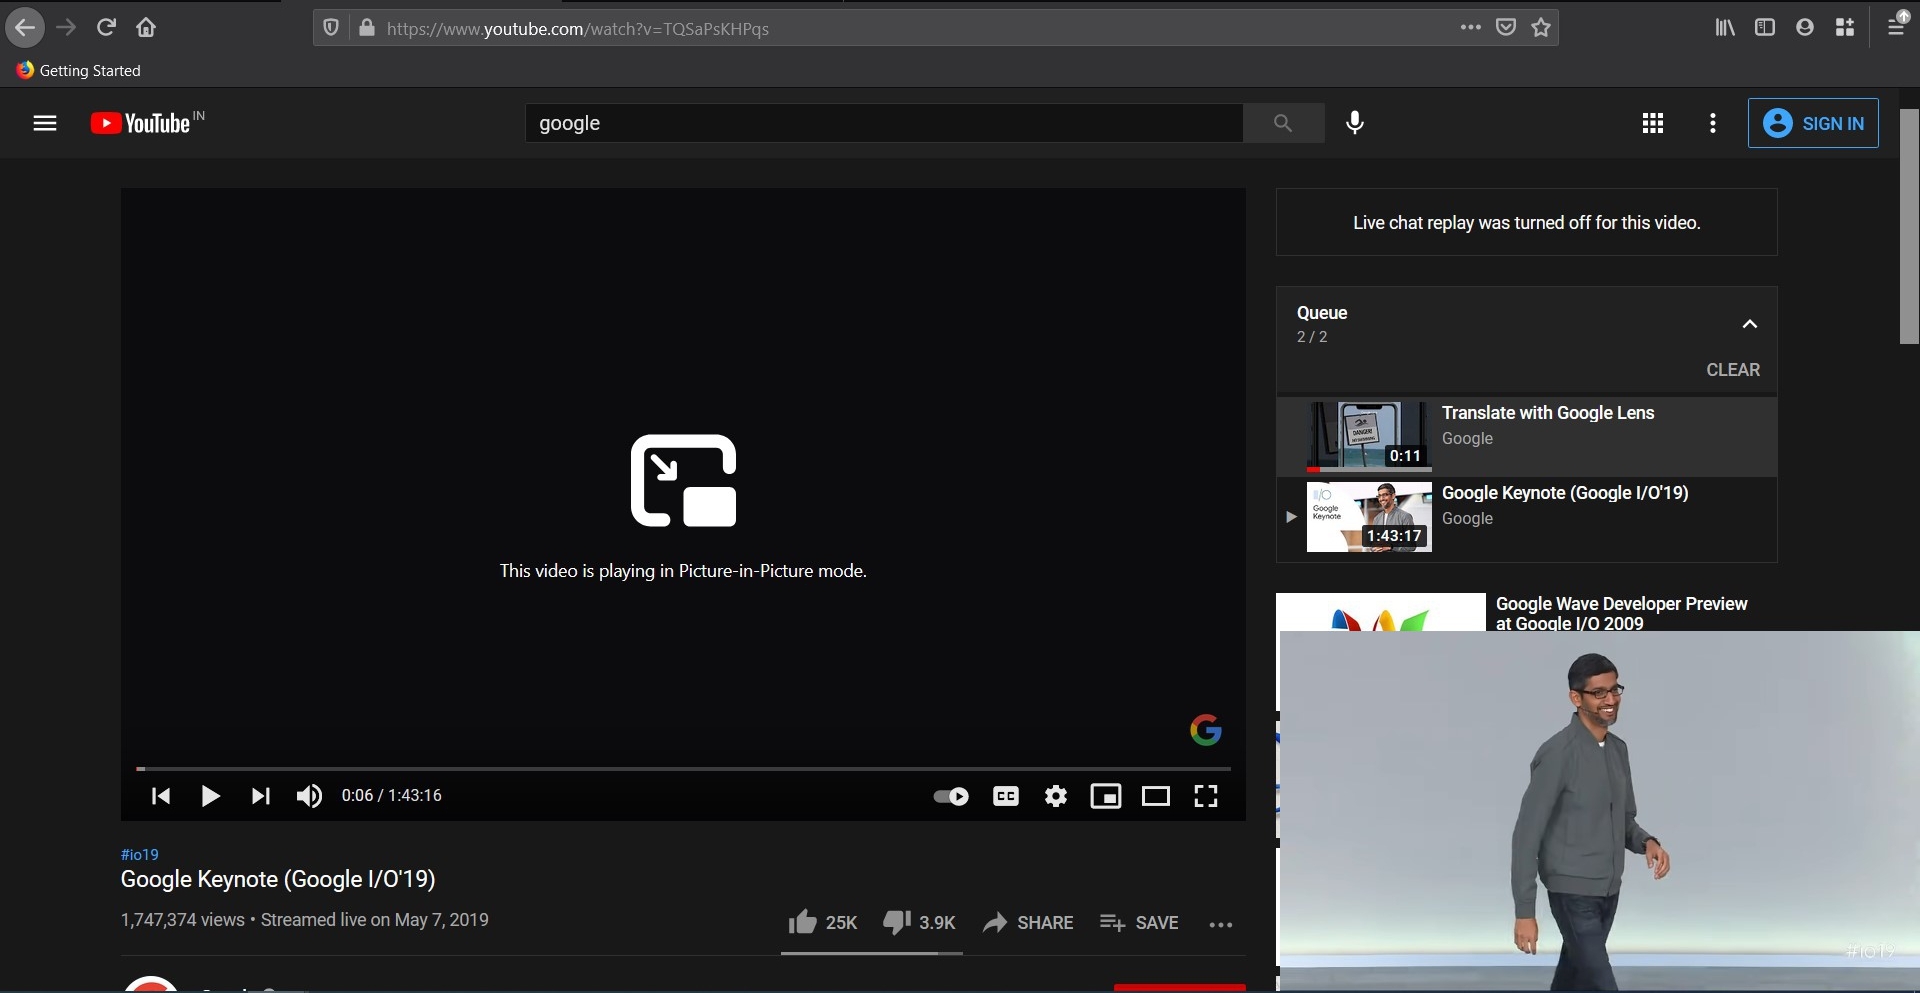 This video is playing in Picture in Picture Mode on YouTube Firefox